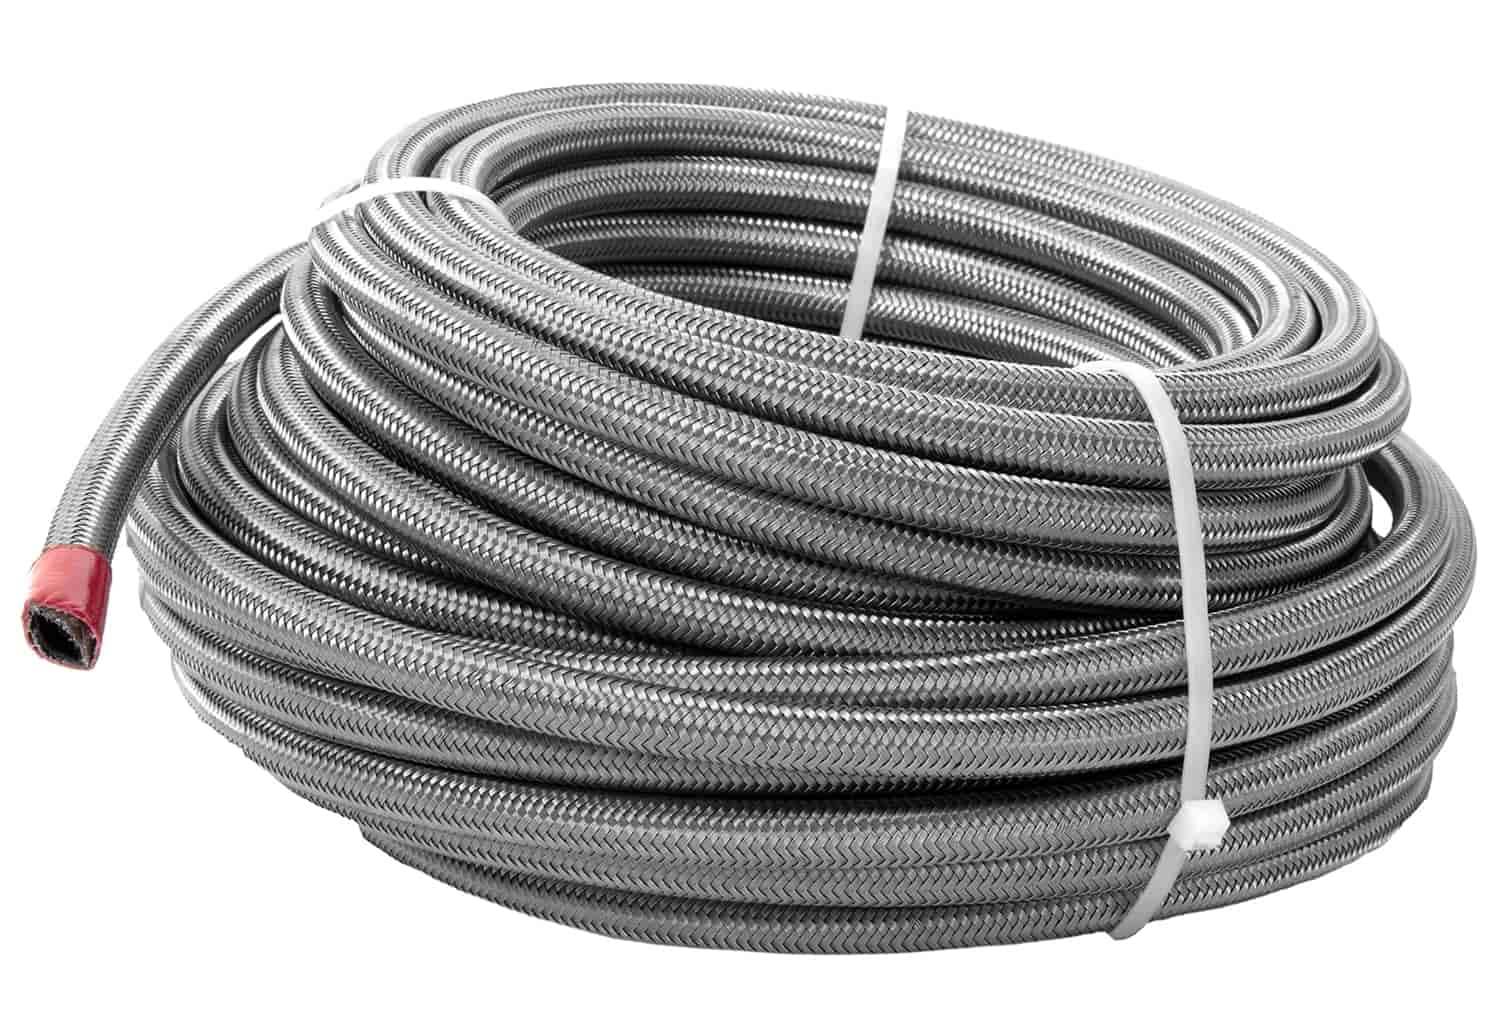 Braided Stainless Steel PTFE Fuel Hose -10 AN x 20 ft